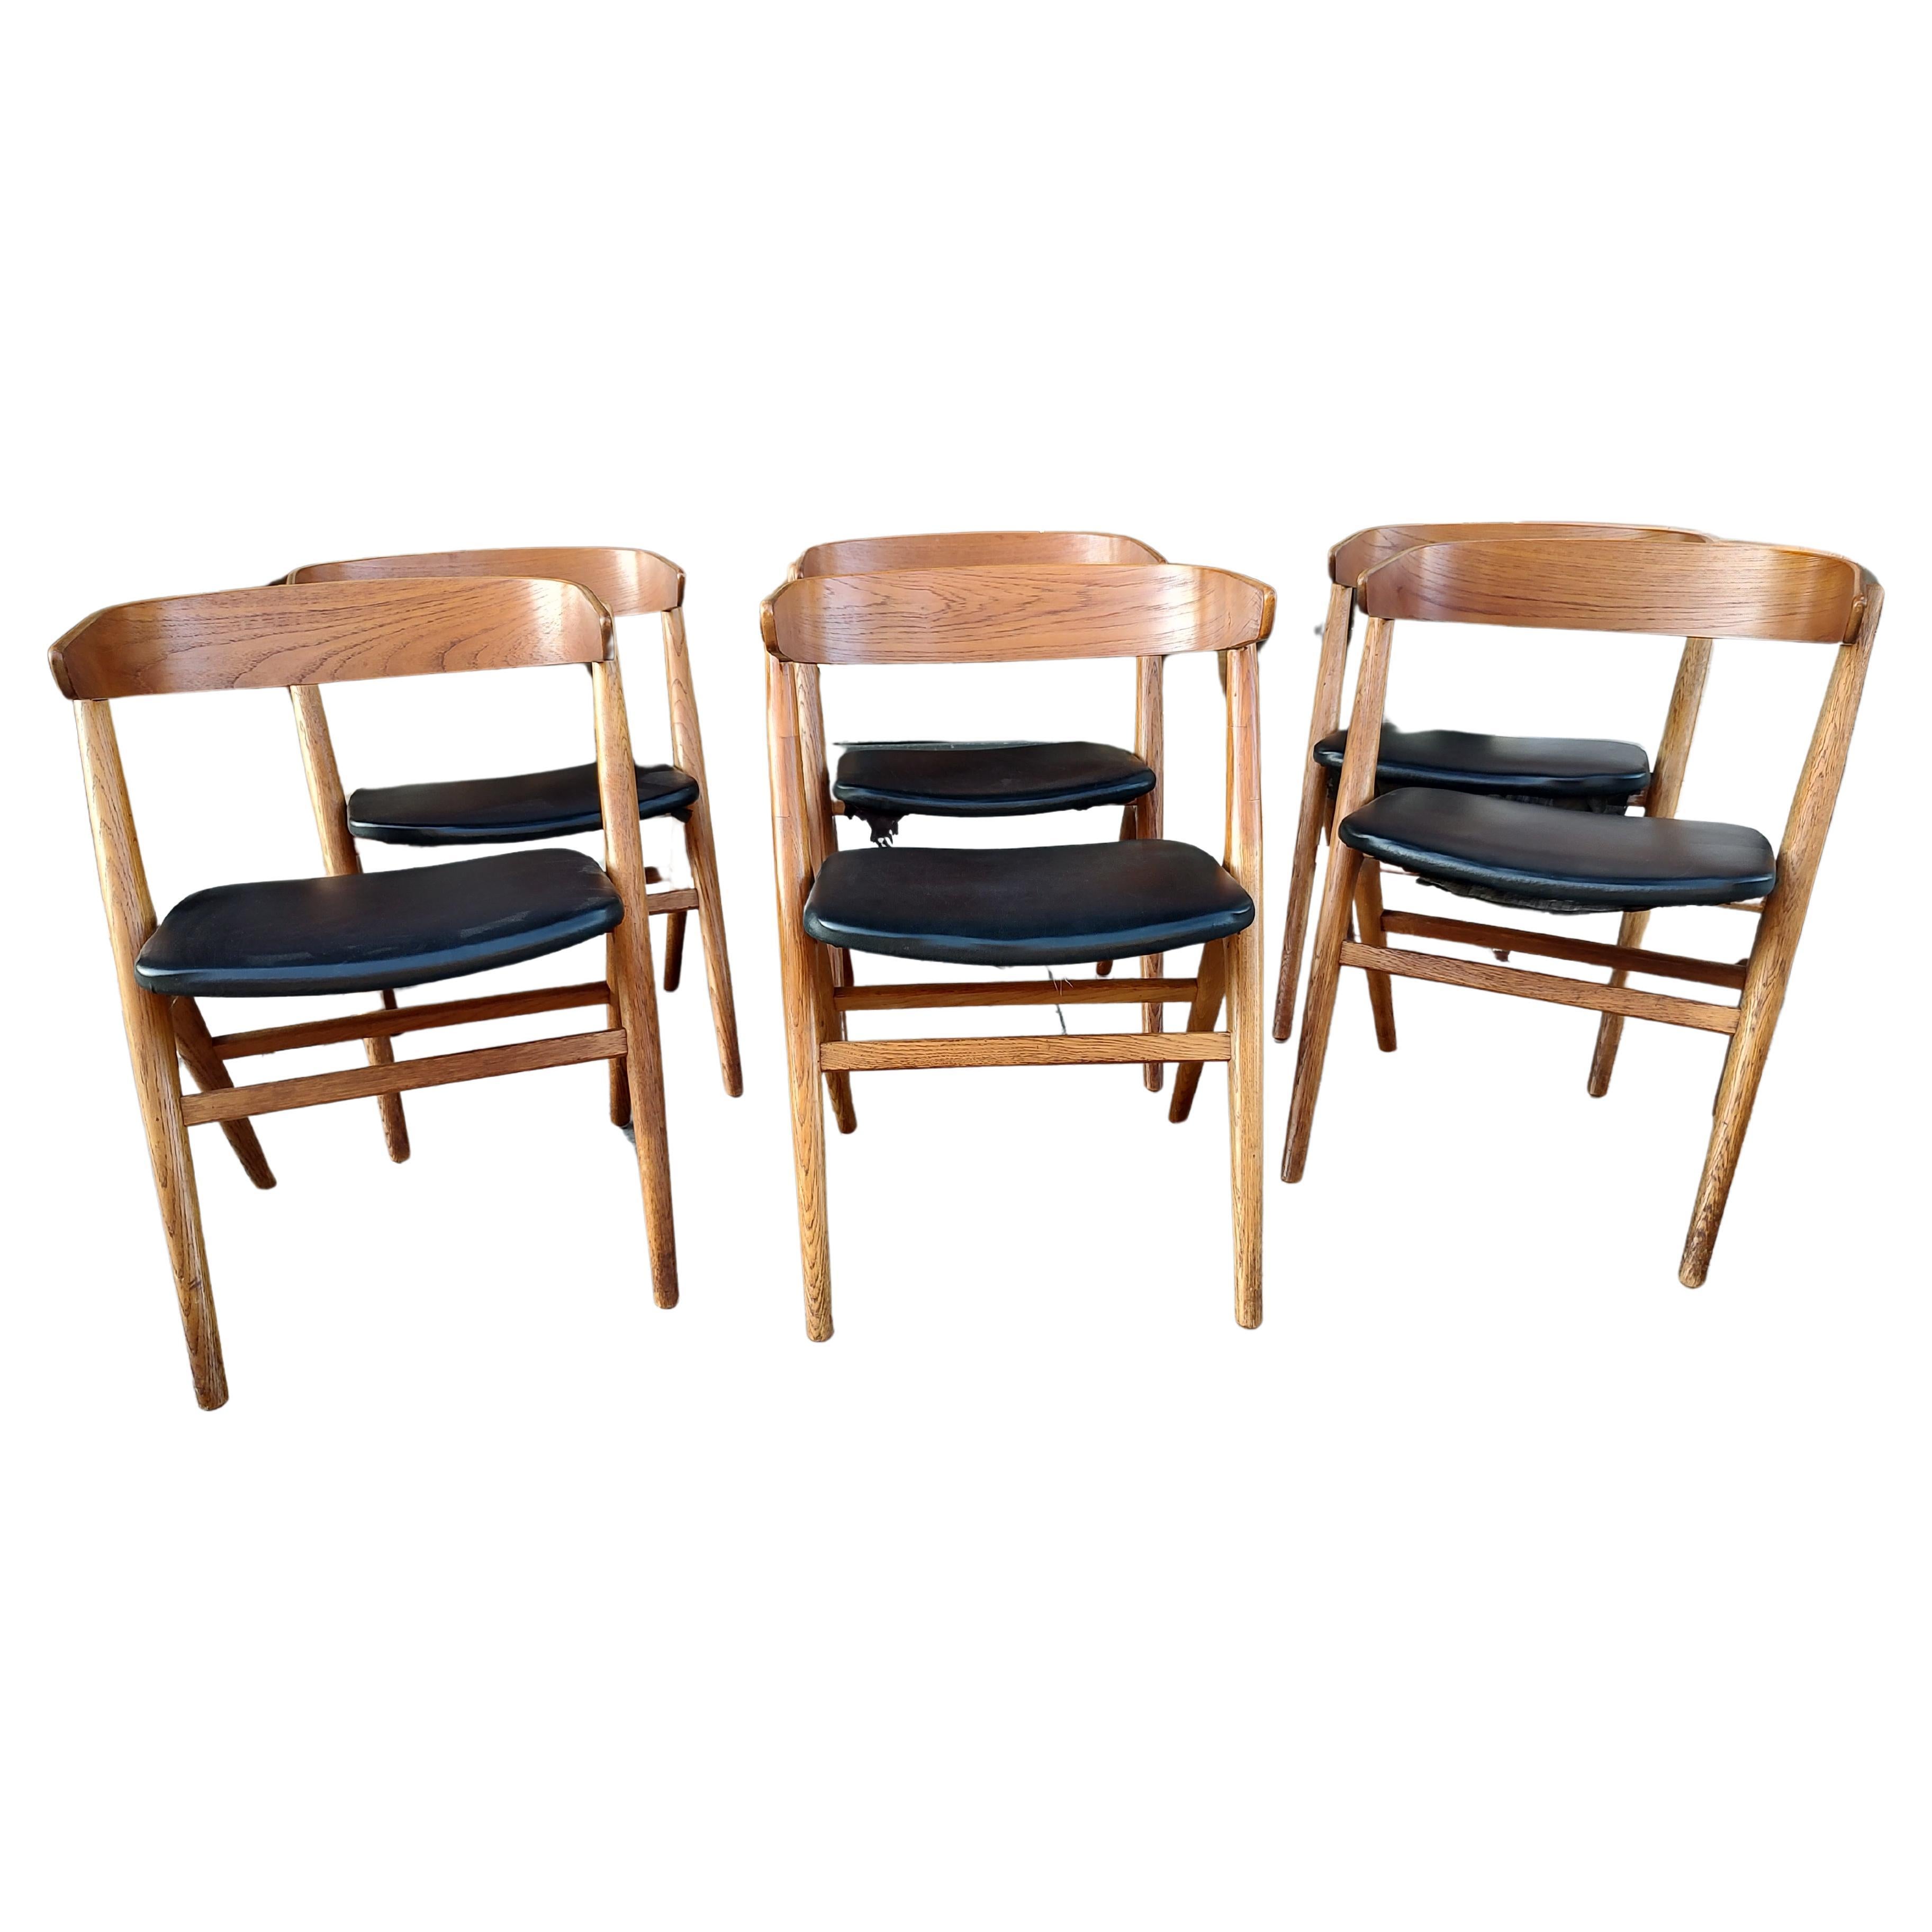 Fabulous set of six dining chairs by Helge Sibast with curved, molded backrests and a A - Frame style base for design of the chair. Faux leather Skai is the material on the seats. In excellent vintage condition with minimal wear. One chair has had a